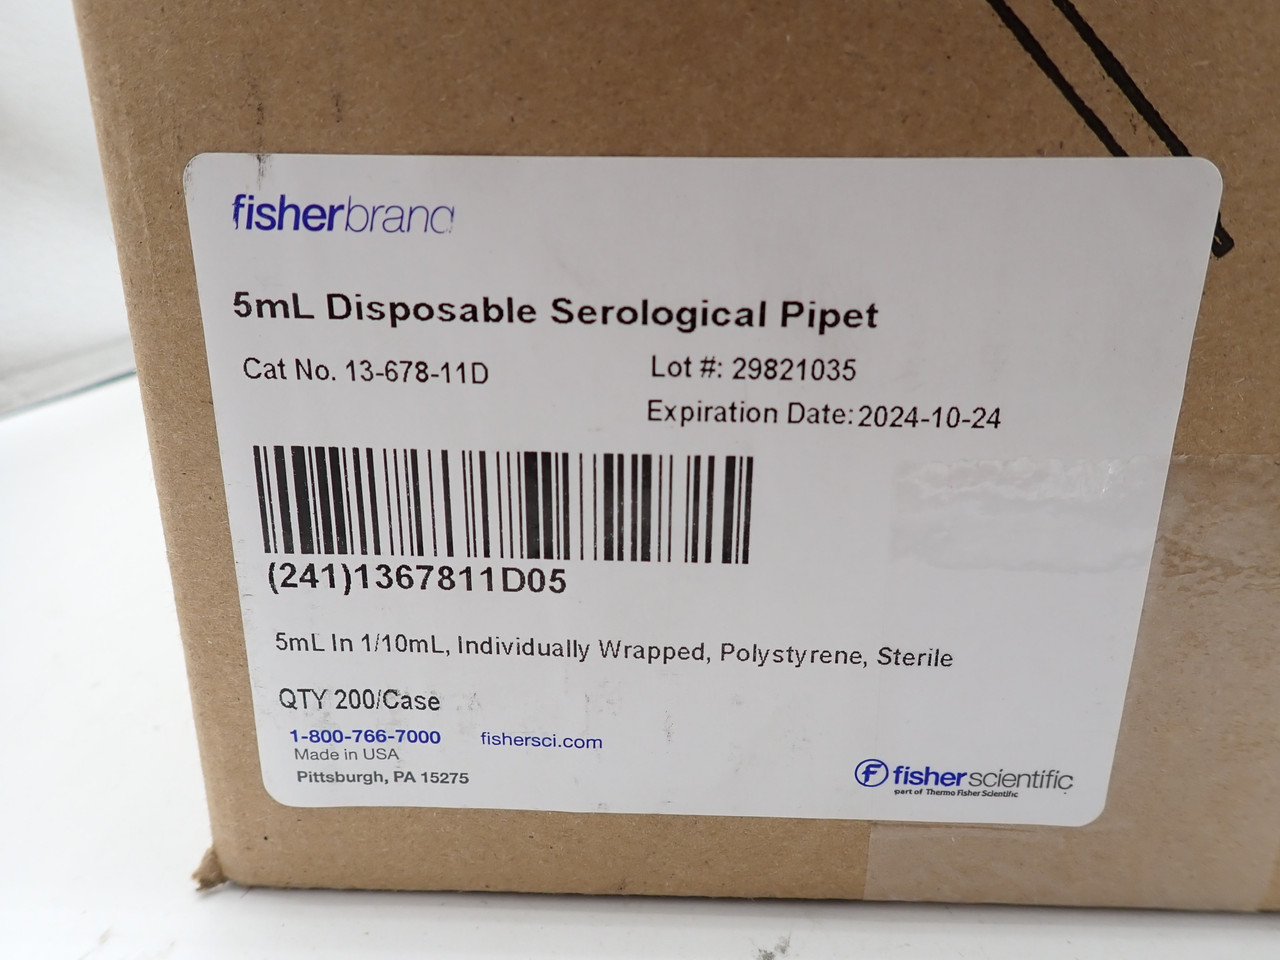 Fisherbrand 13-678-11D 5mL Disposable Serological Pipet QTY 200